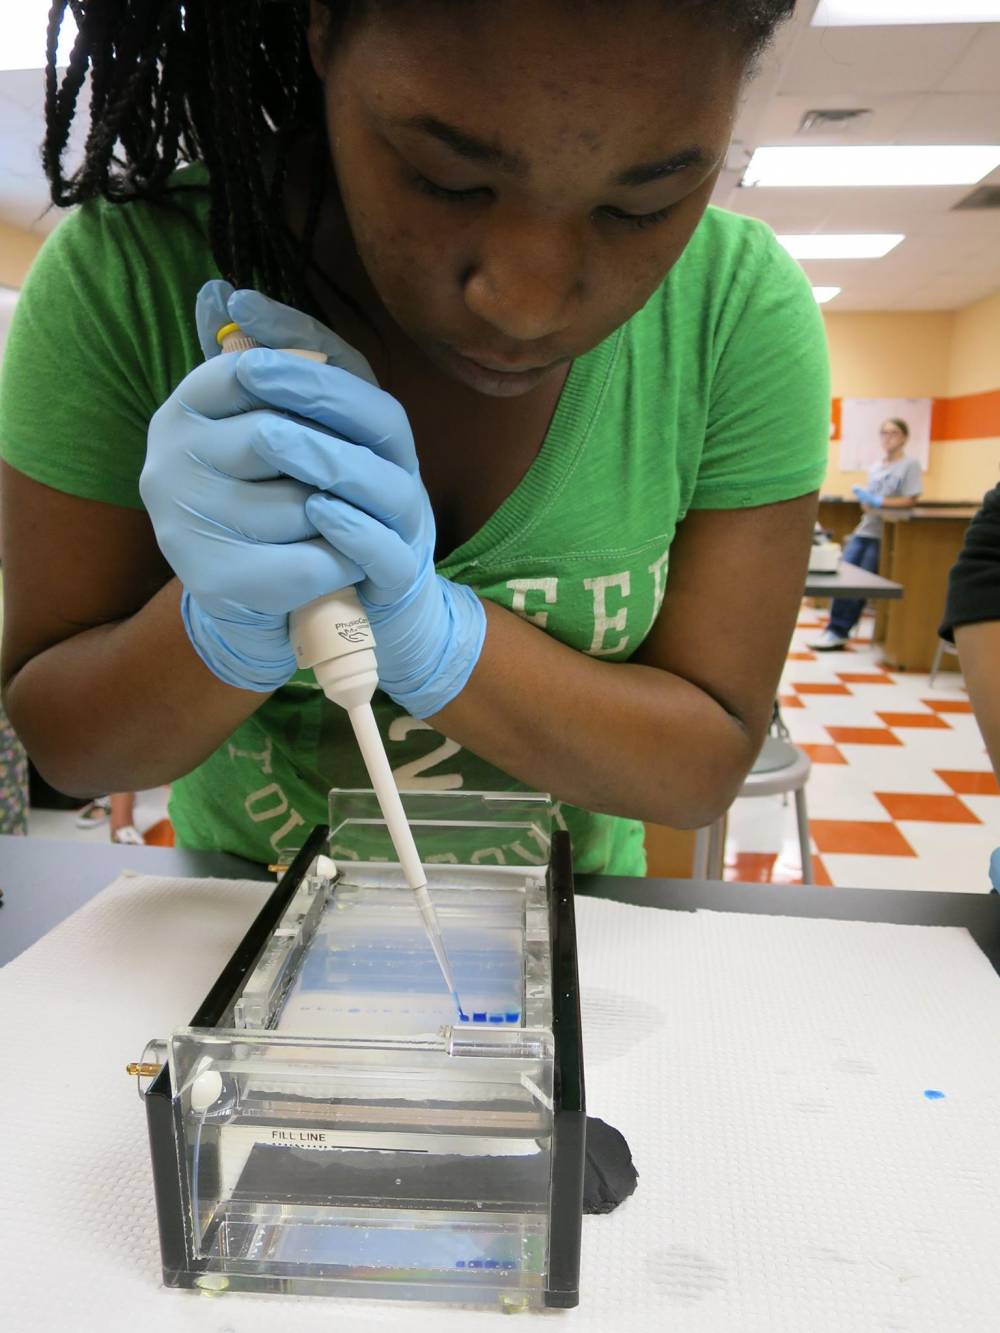 TOP SOUTH CAROLINA GIRLS CAMP: Clemson University Summer Science Camps is a Top Girls Summer Camp located in Clemson South Carolina offering many fun and enriching Girls and other camp programs. 